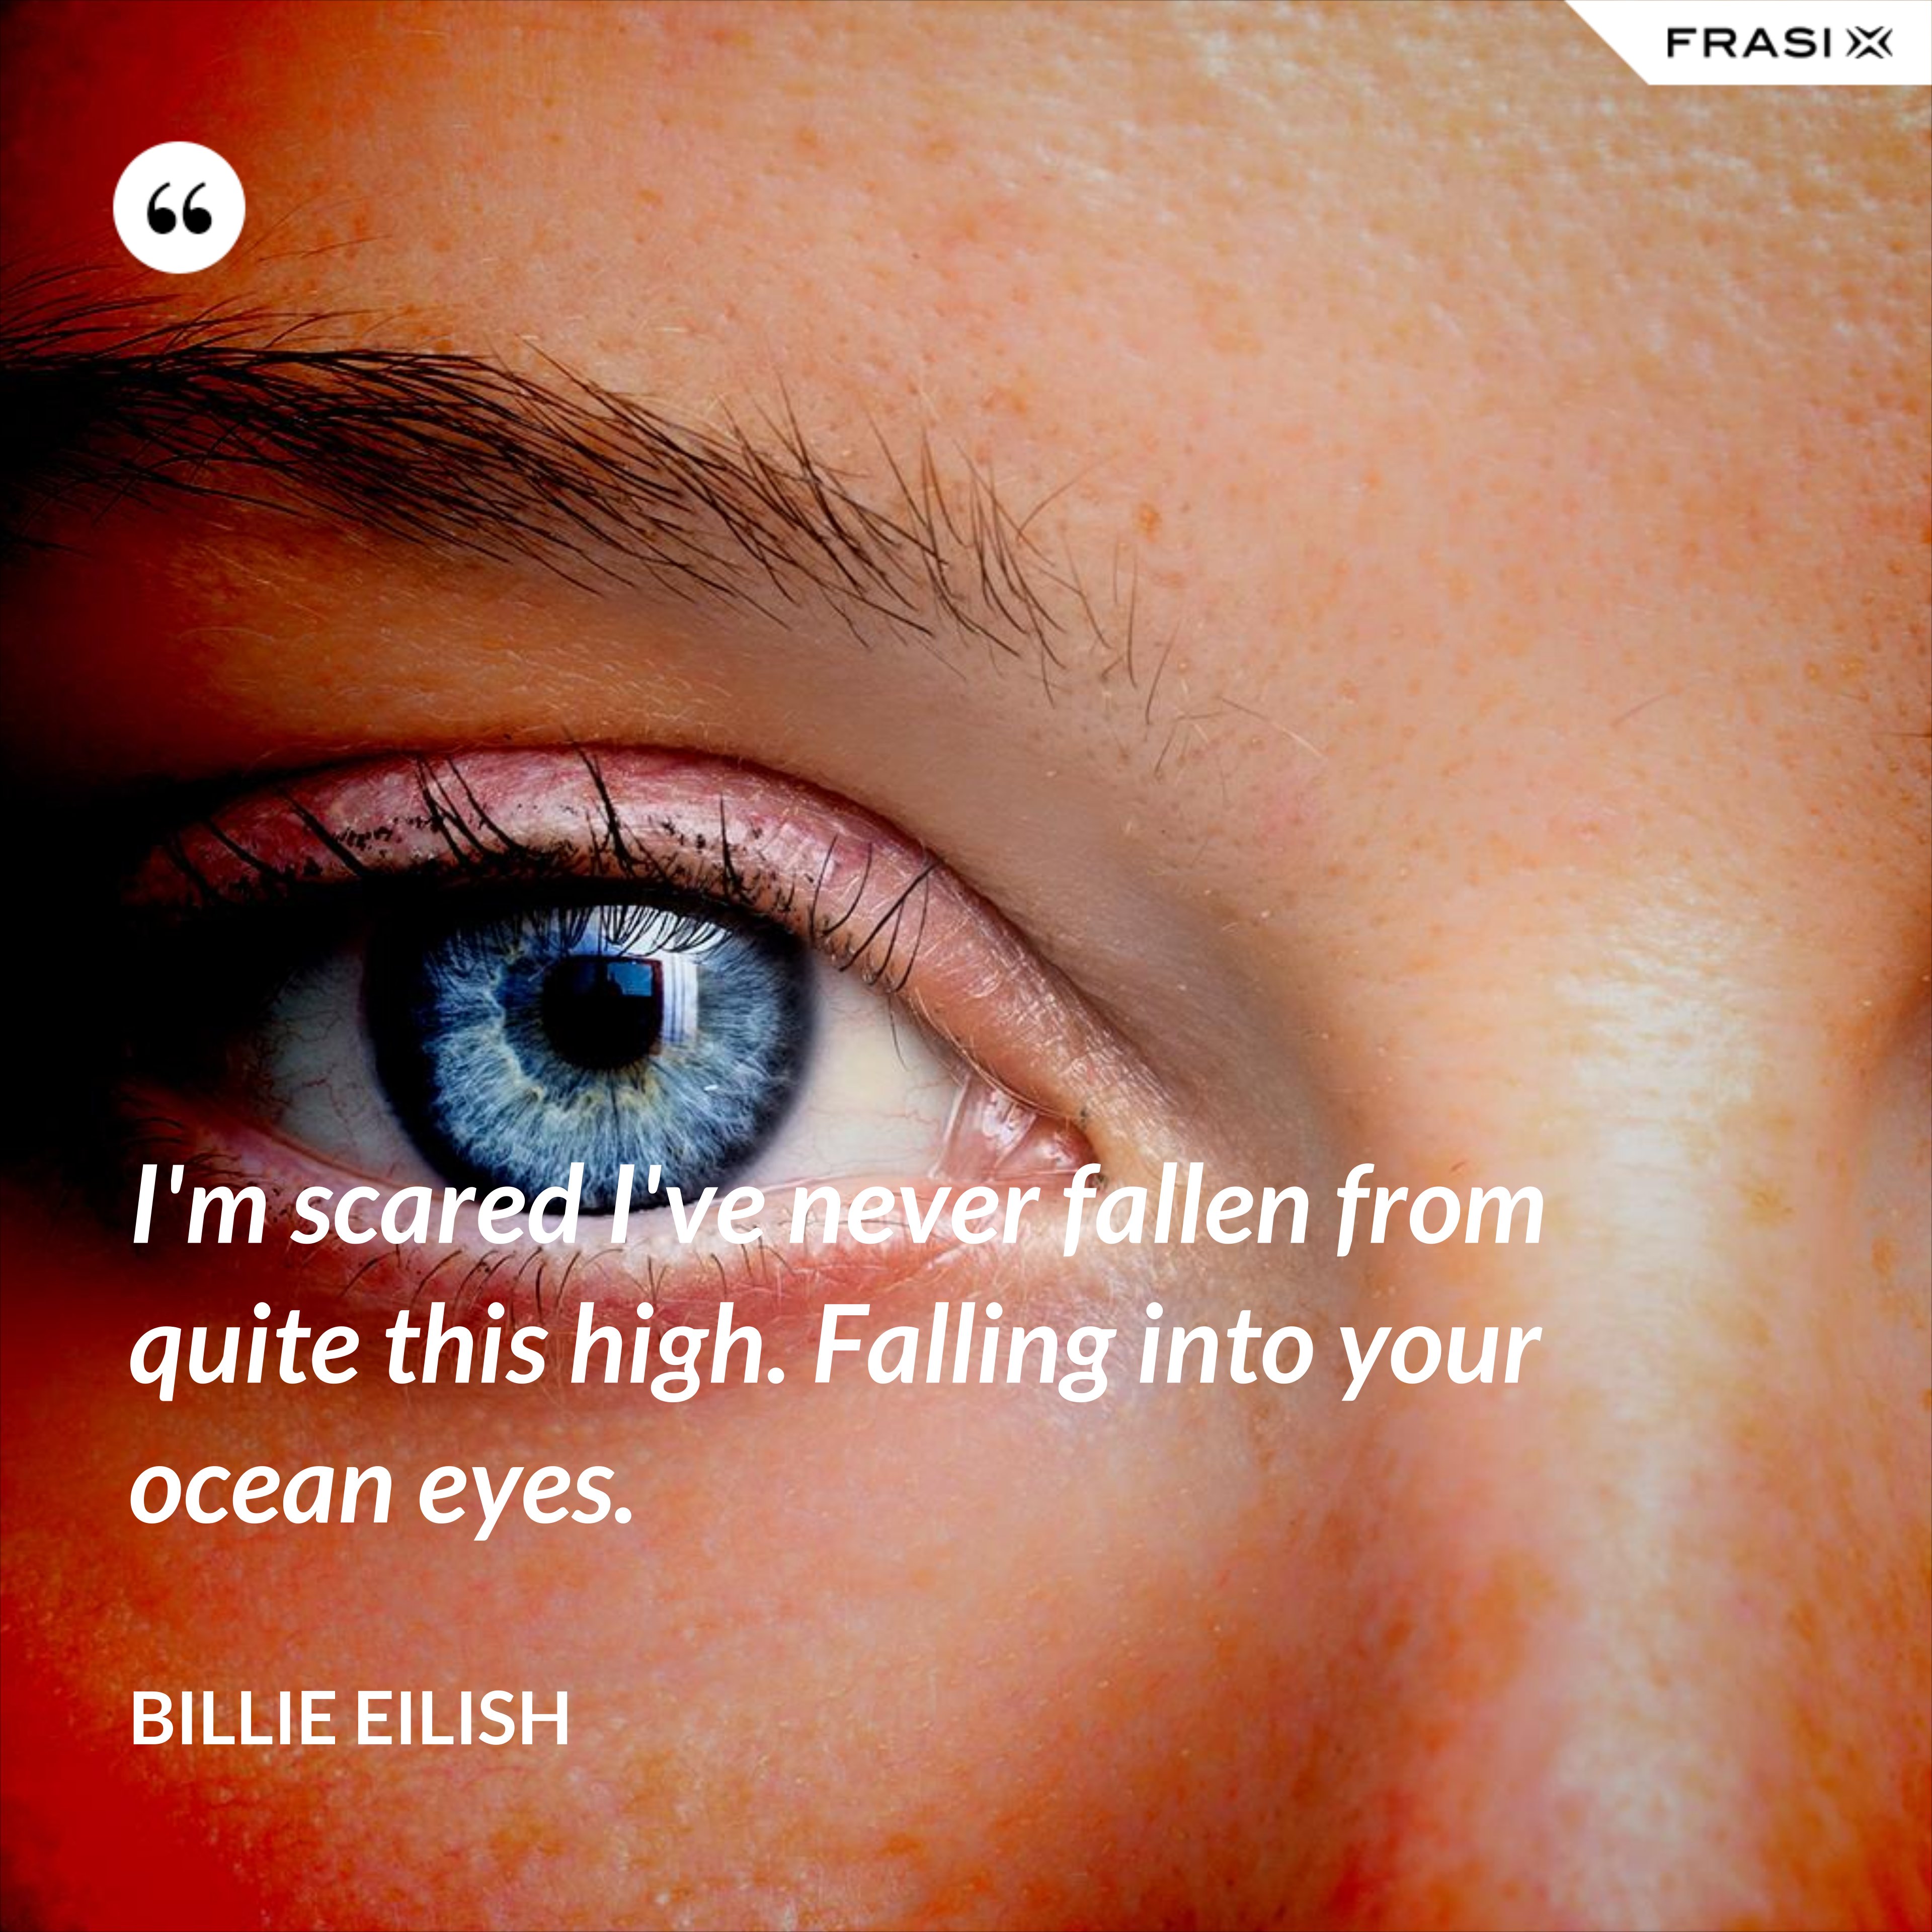 I'm scared I've never fallen from quite this high. Falling into your ocean eyes. - Billie Eilish